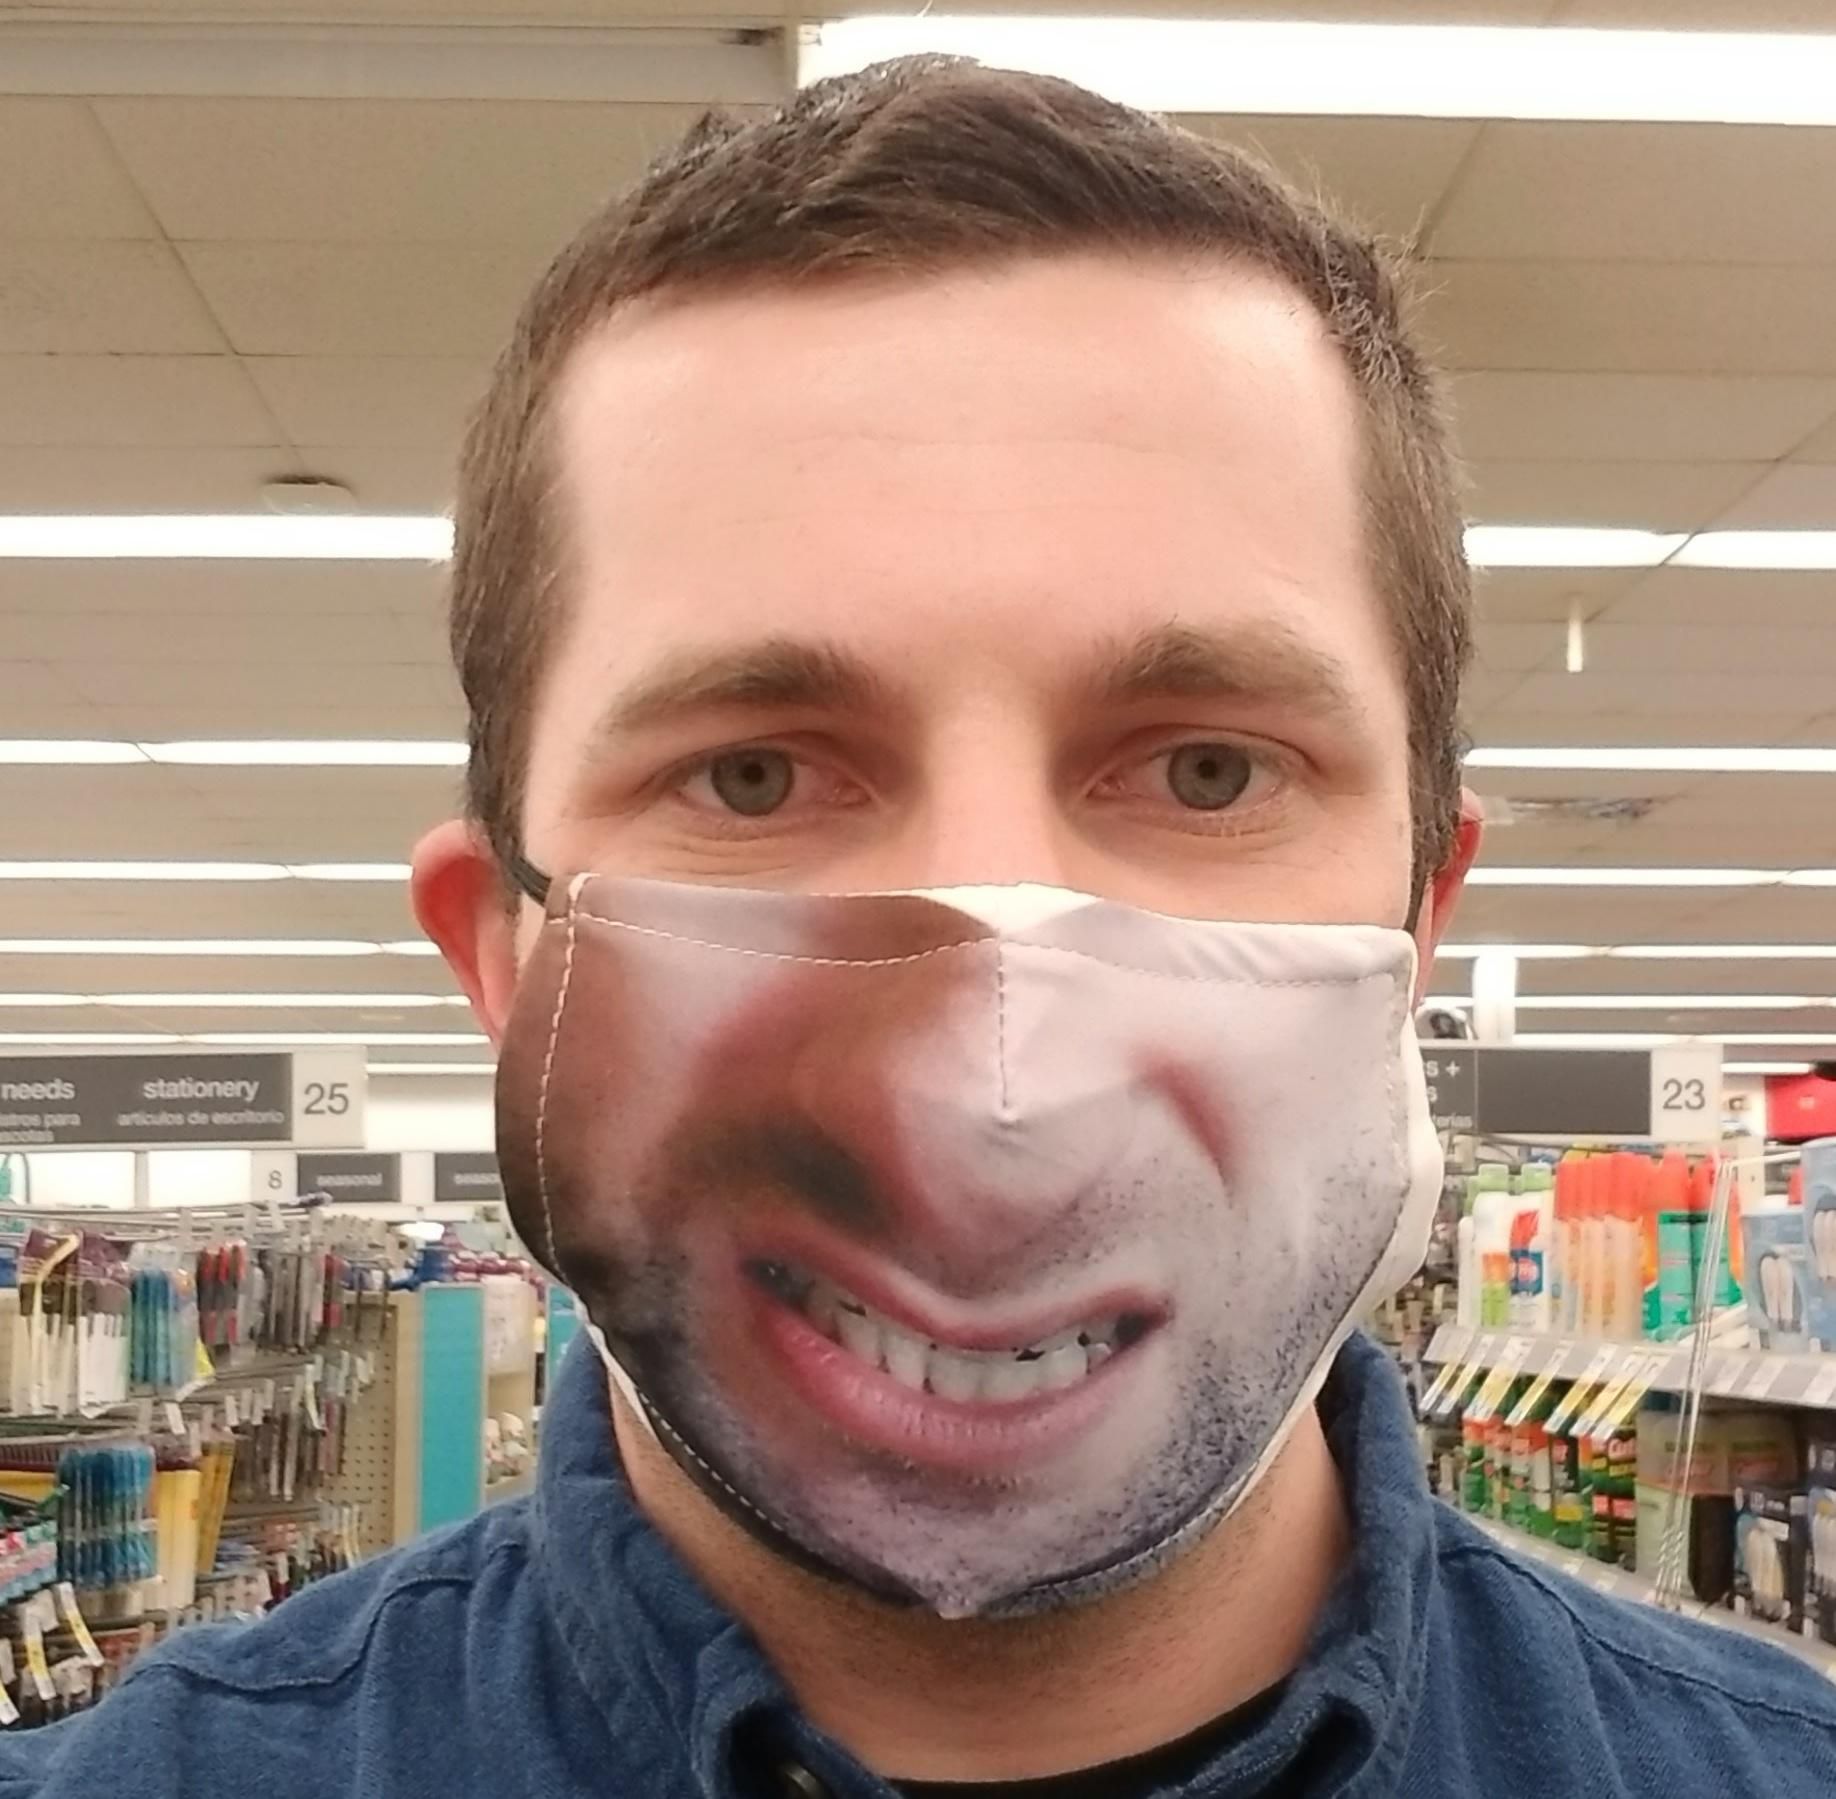 Decided to try and get one of those custom face-masks... it didn't turn out so good...